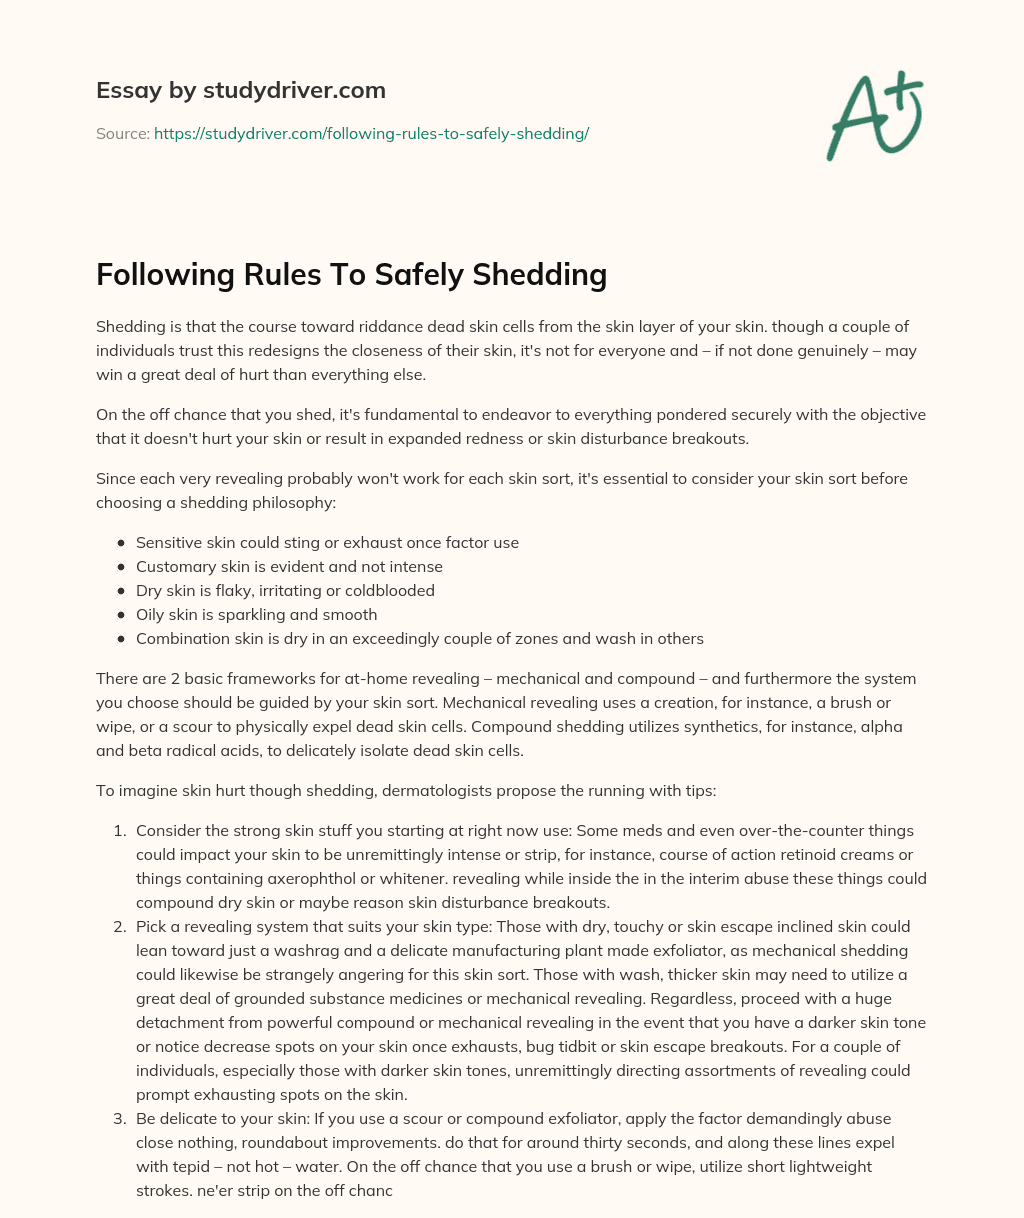 Following Rules to Safely Shedding essay